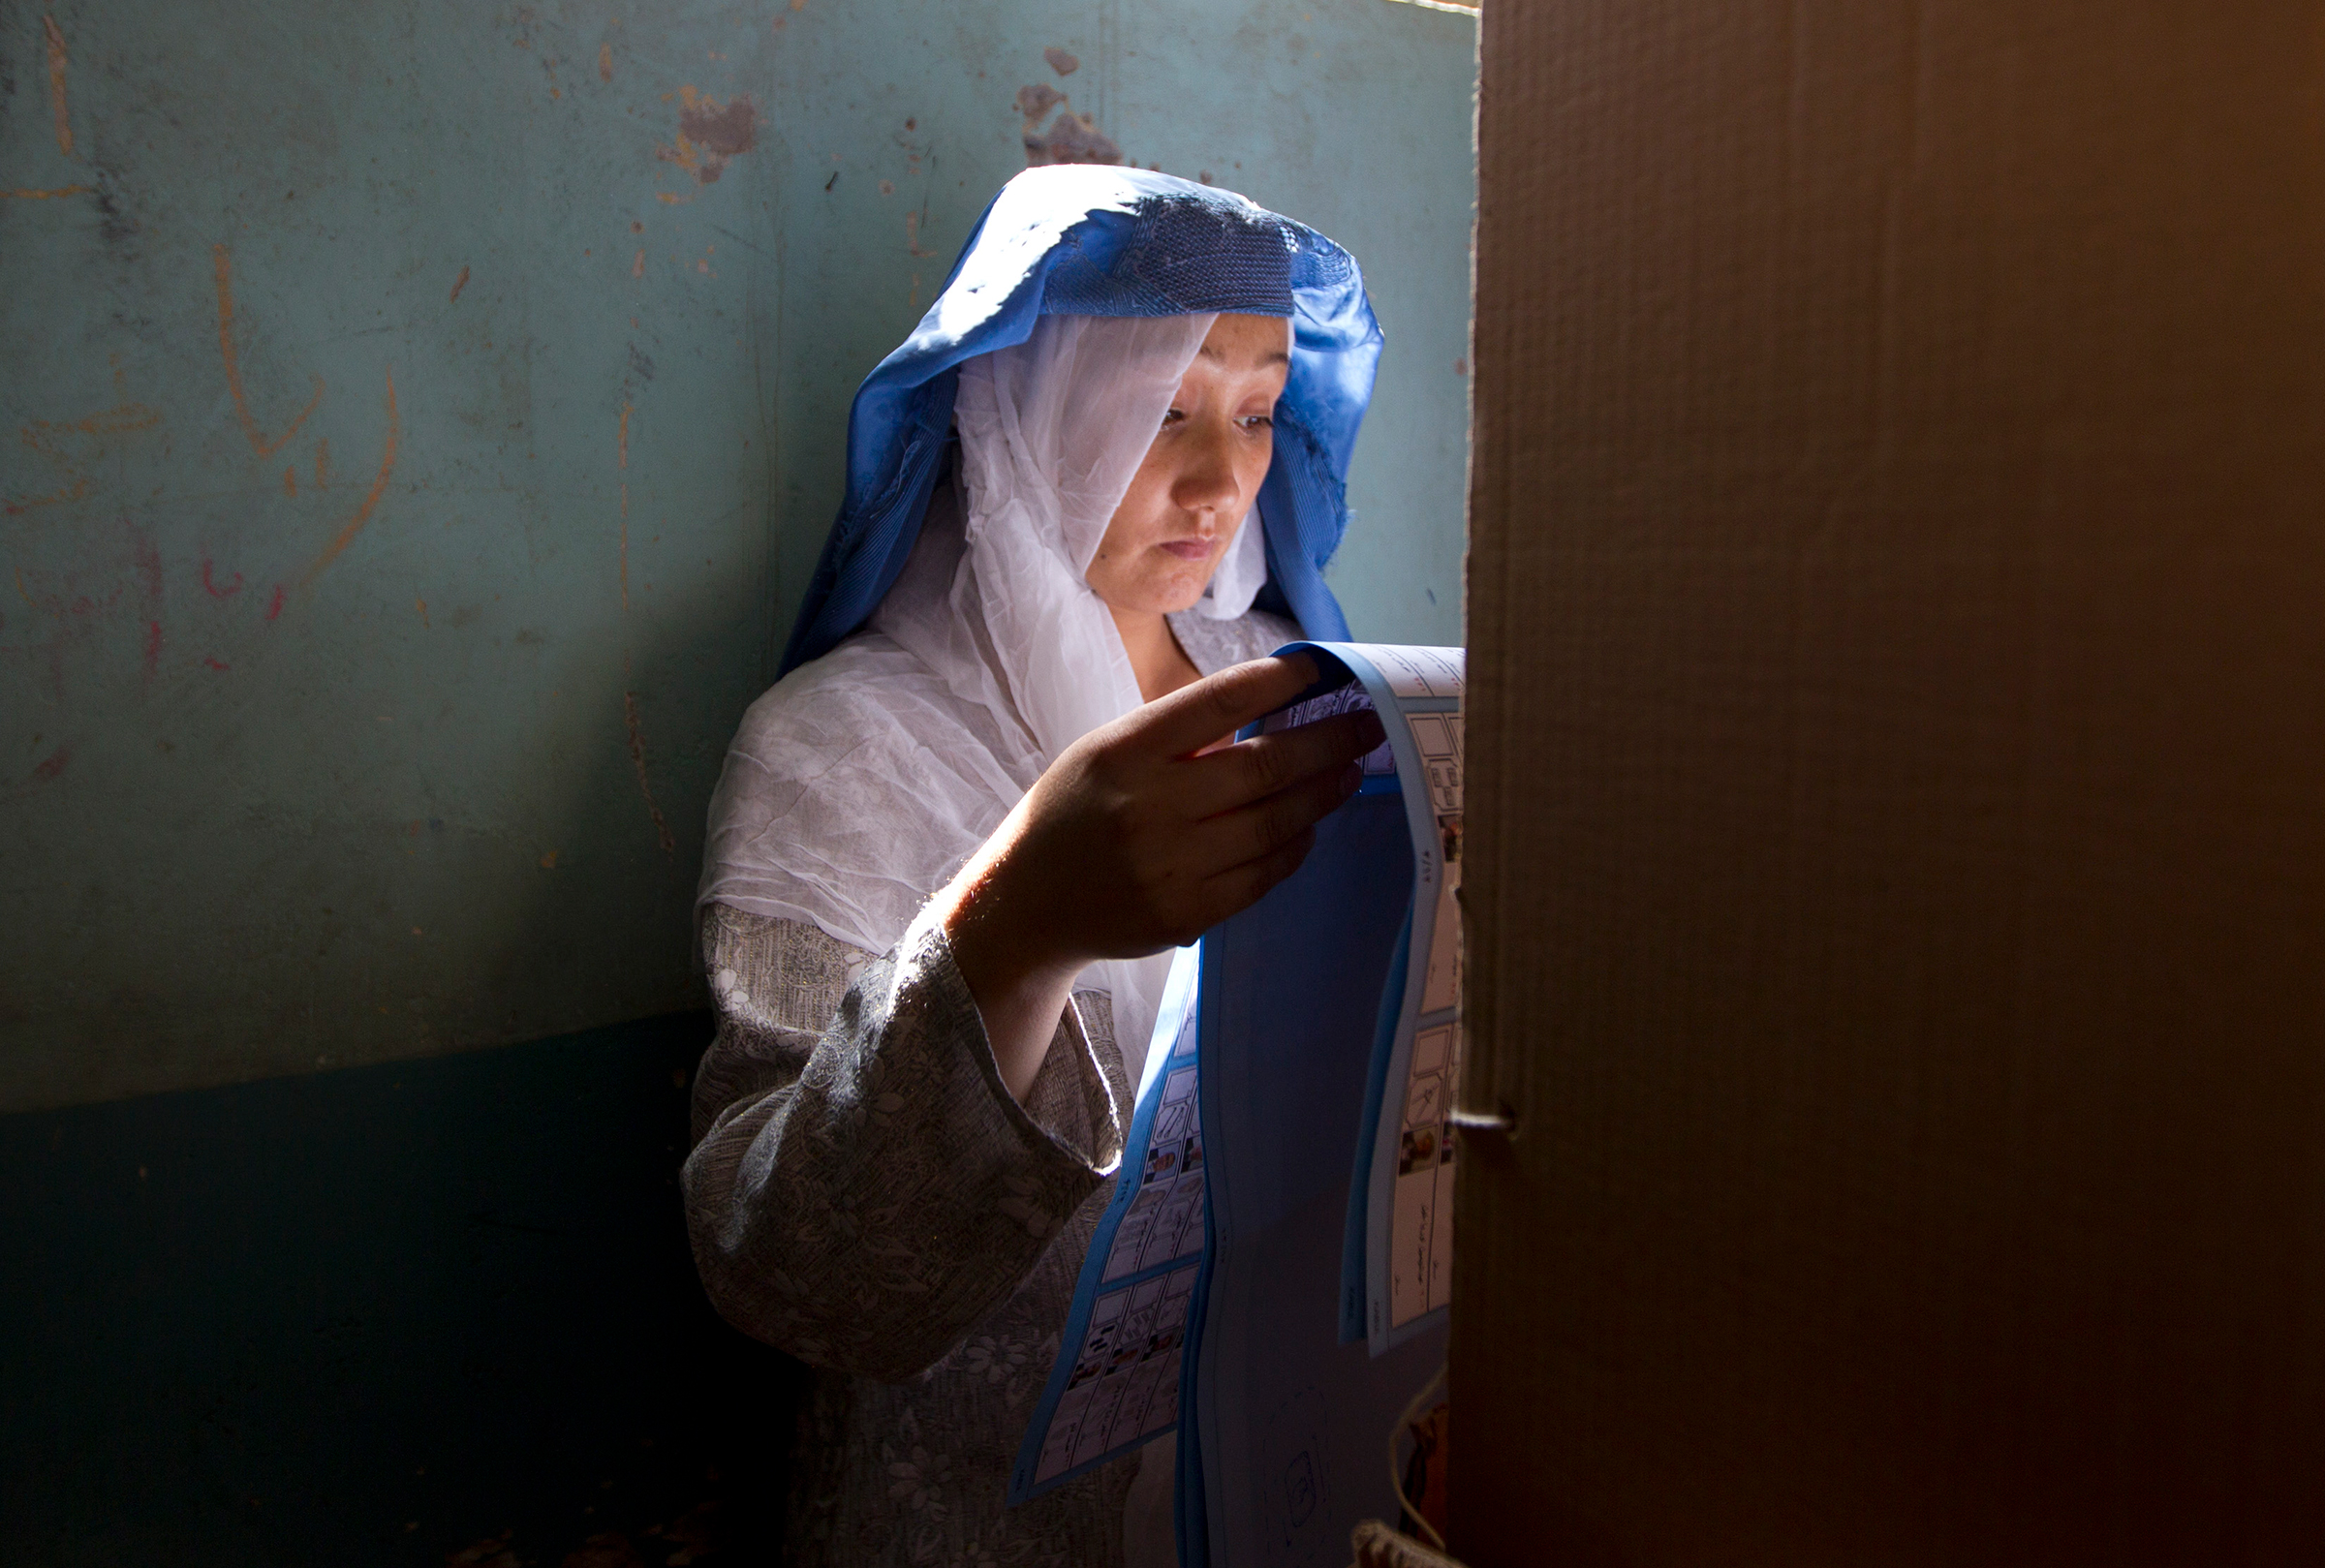 An Afghan woman searches for her candidate in a multiple-page ballot at a mosque in Kabul in September 2010. The Taliban had warned voters to boycott the polls and threatened violence to disturb the country's elections.